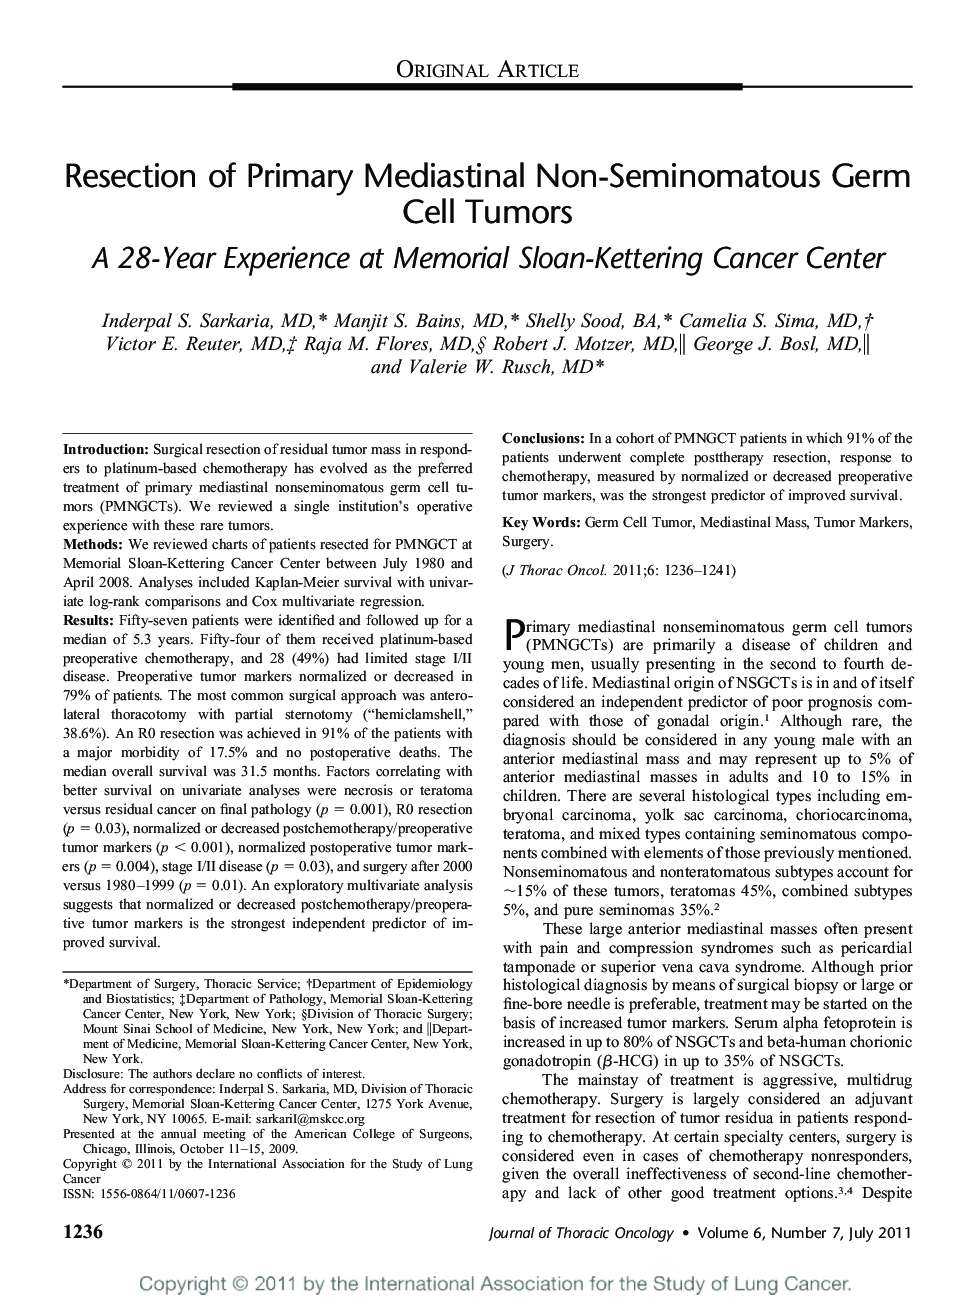 Resection of Primary Mediastinal Non-Seminomatous Germ Cell Tumors: A 28-Year Experience at Memorial Sloan-Kettering Cancer Center 